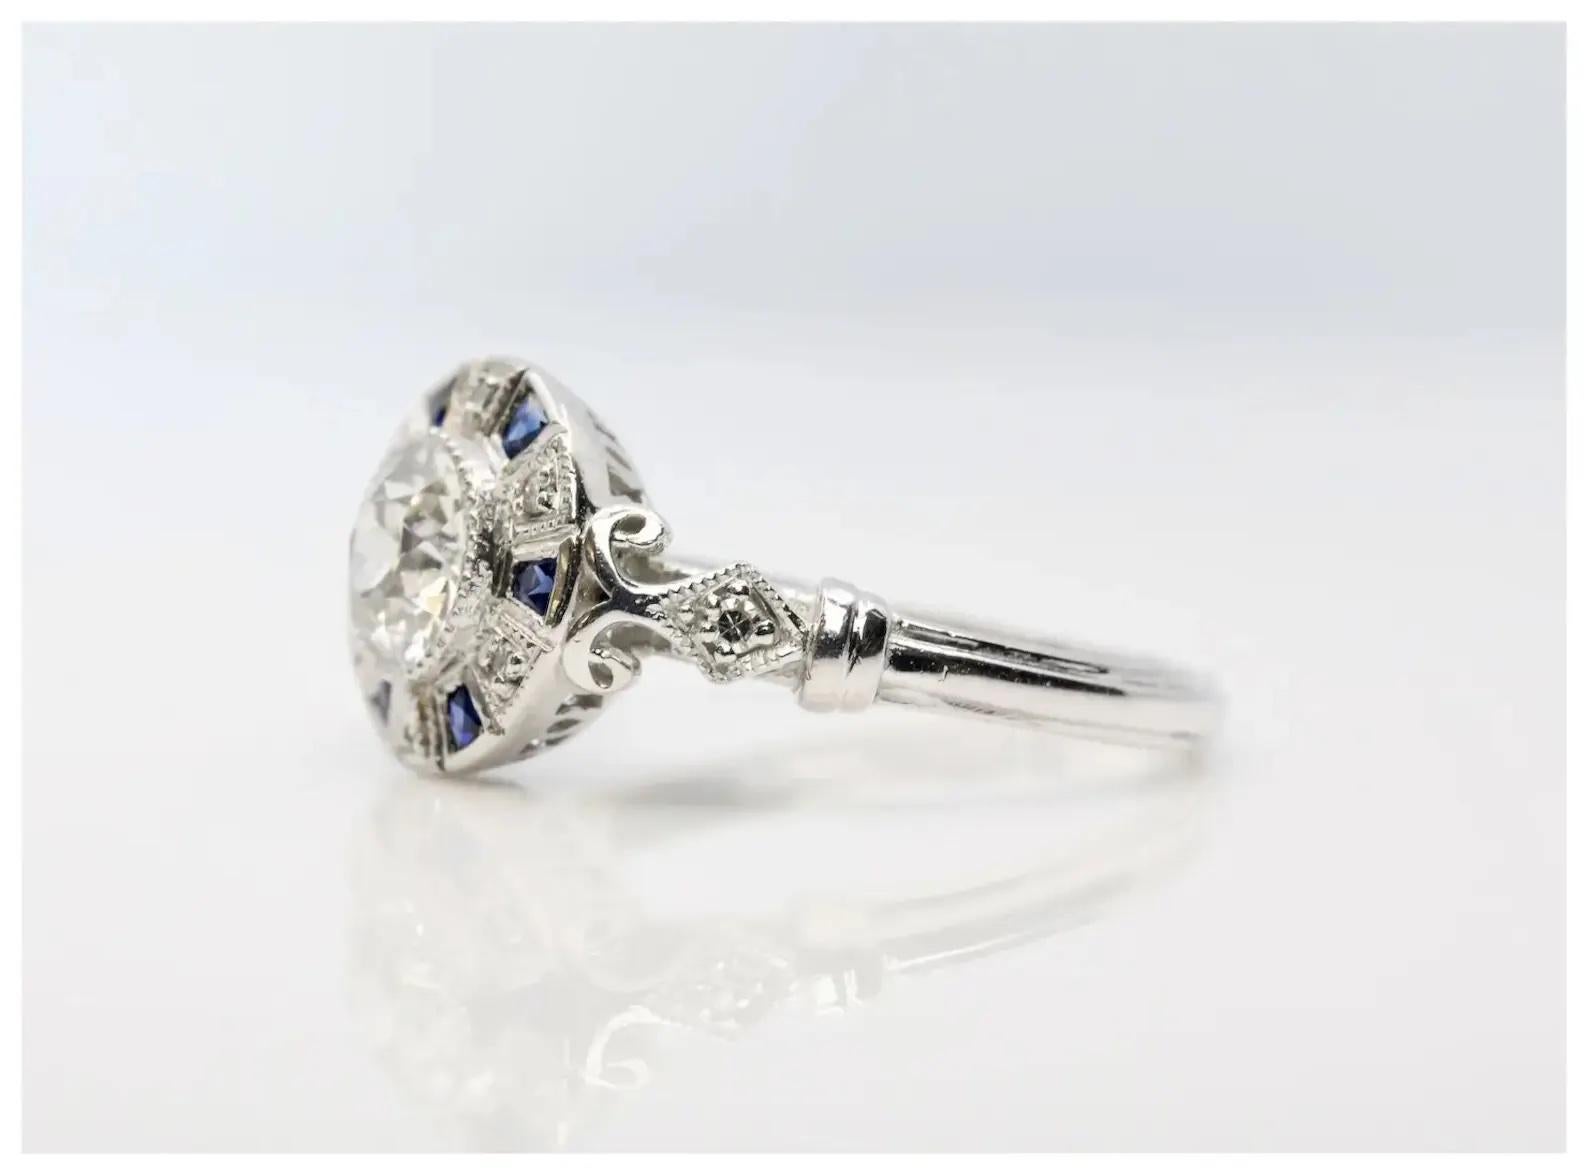 A handmade Art Deco style diamond target form engagement ring in platinum.

Centered by a 0.71 carat old European cut diamond set in a miligrained platinum bezel.

Framed by six French cut blue sapphires of 0.18ctw and eight pave set diamonds of